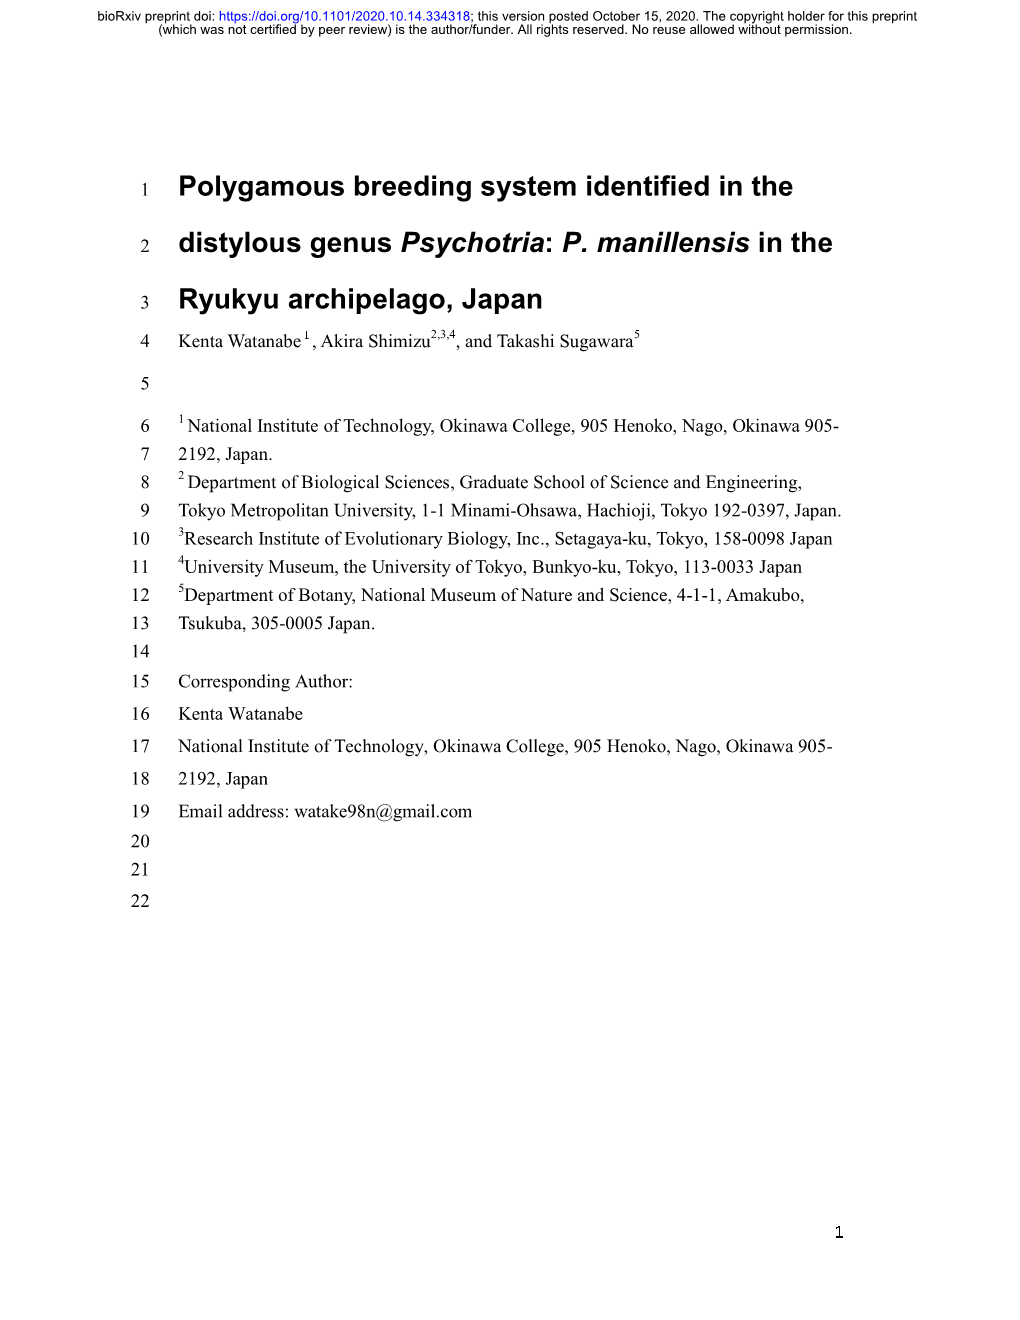 Polygamous Breeding System Identified in the Distylous Genus Psychotria